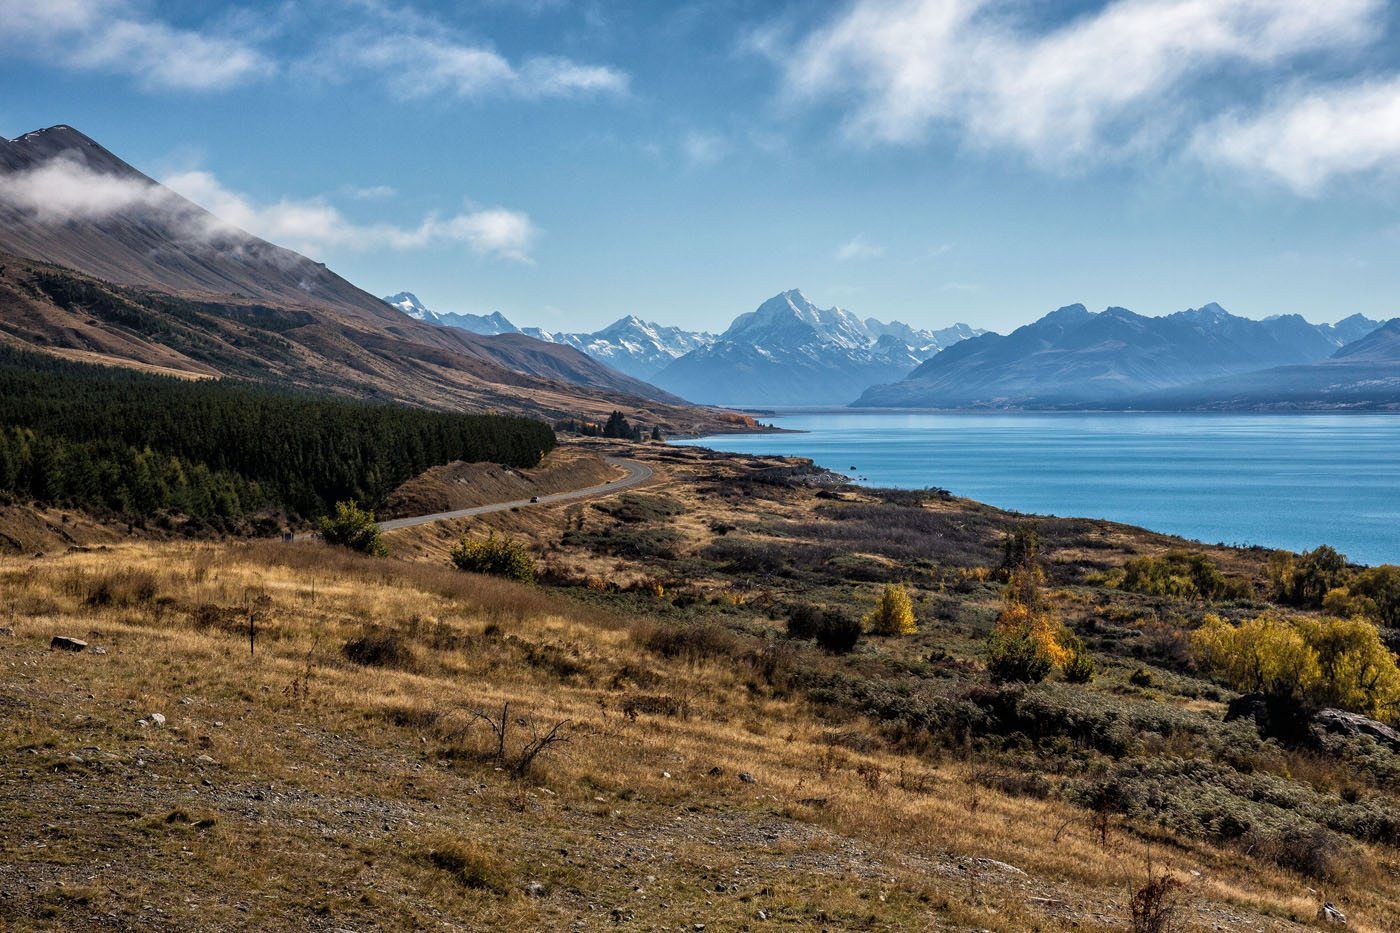 Driving to Mt Cook